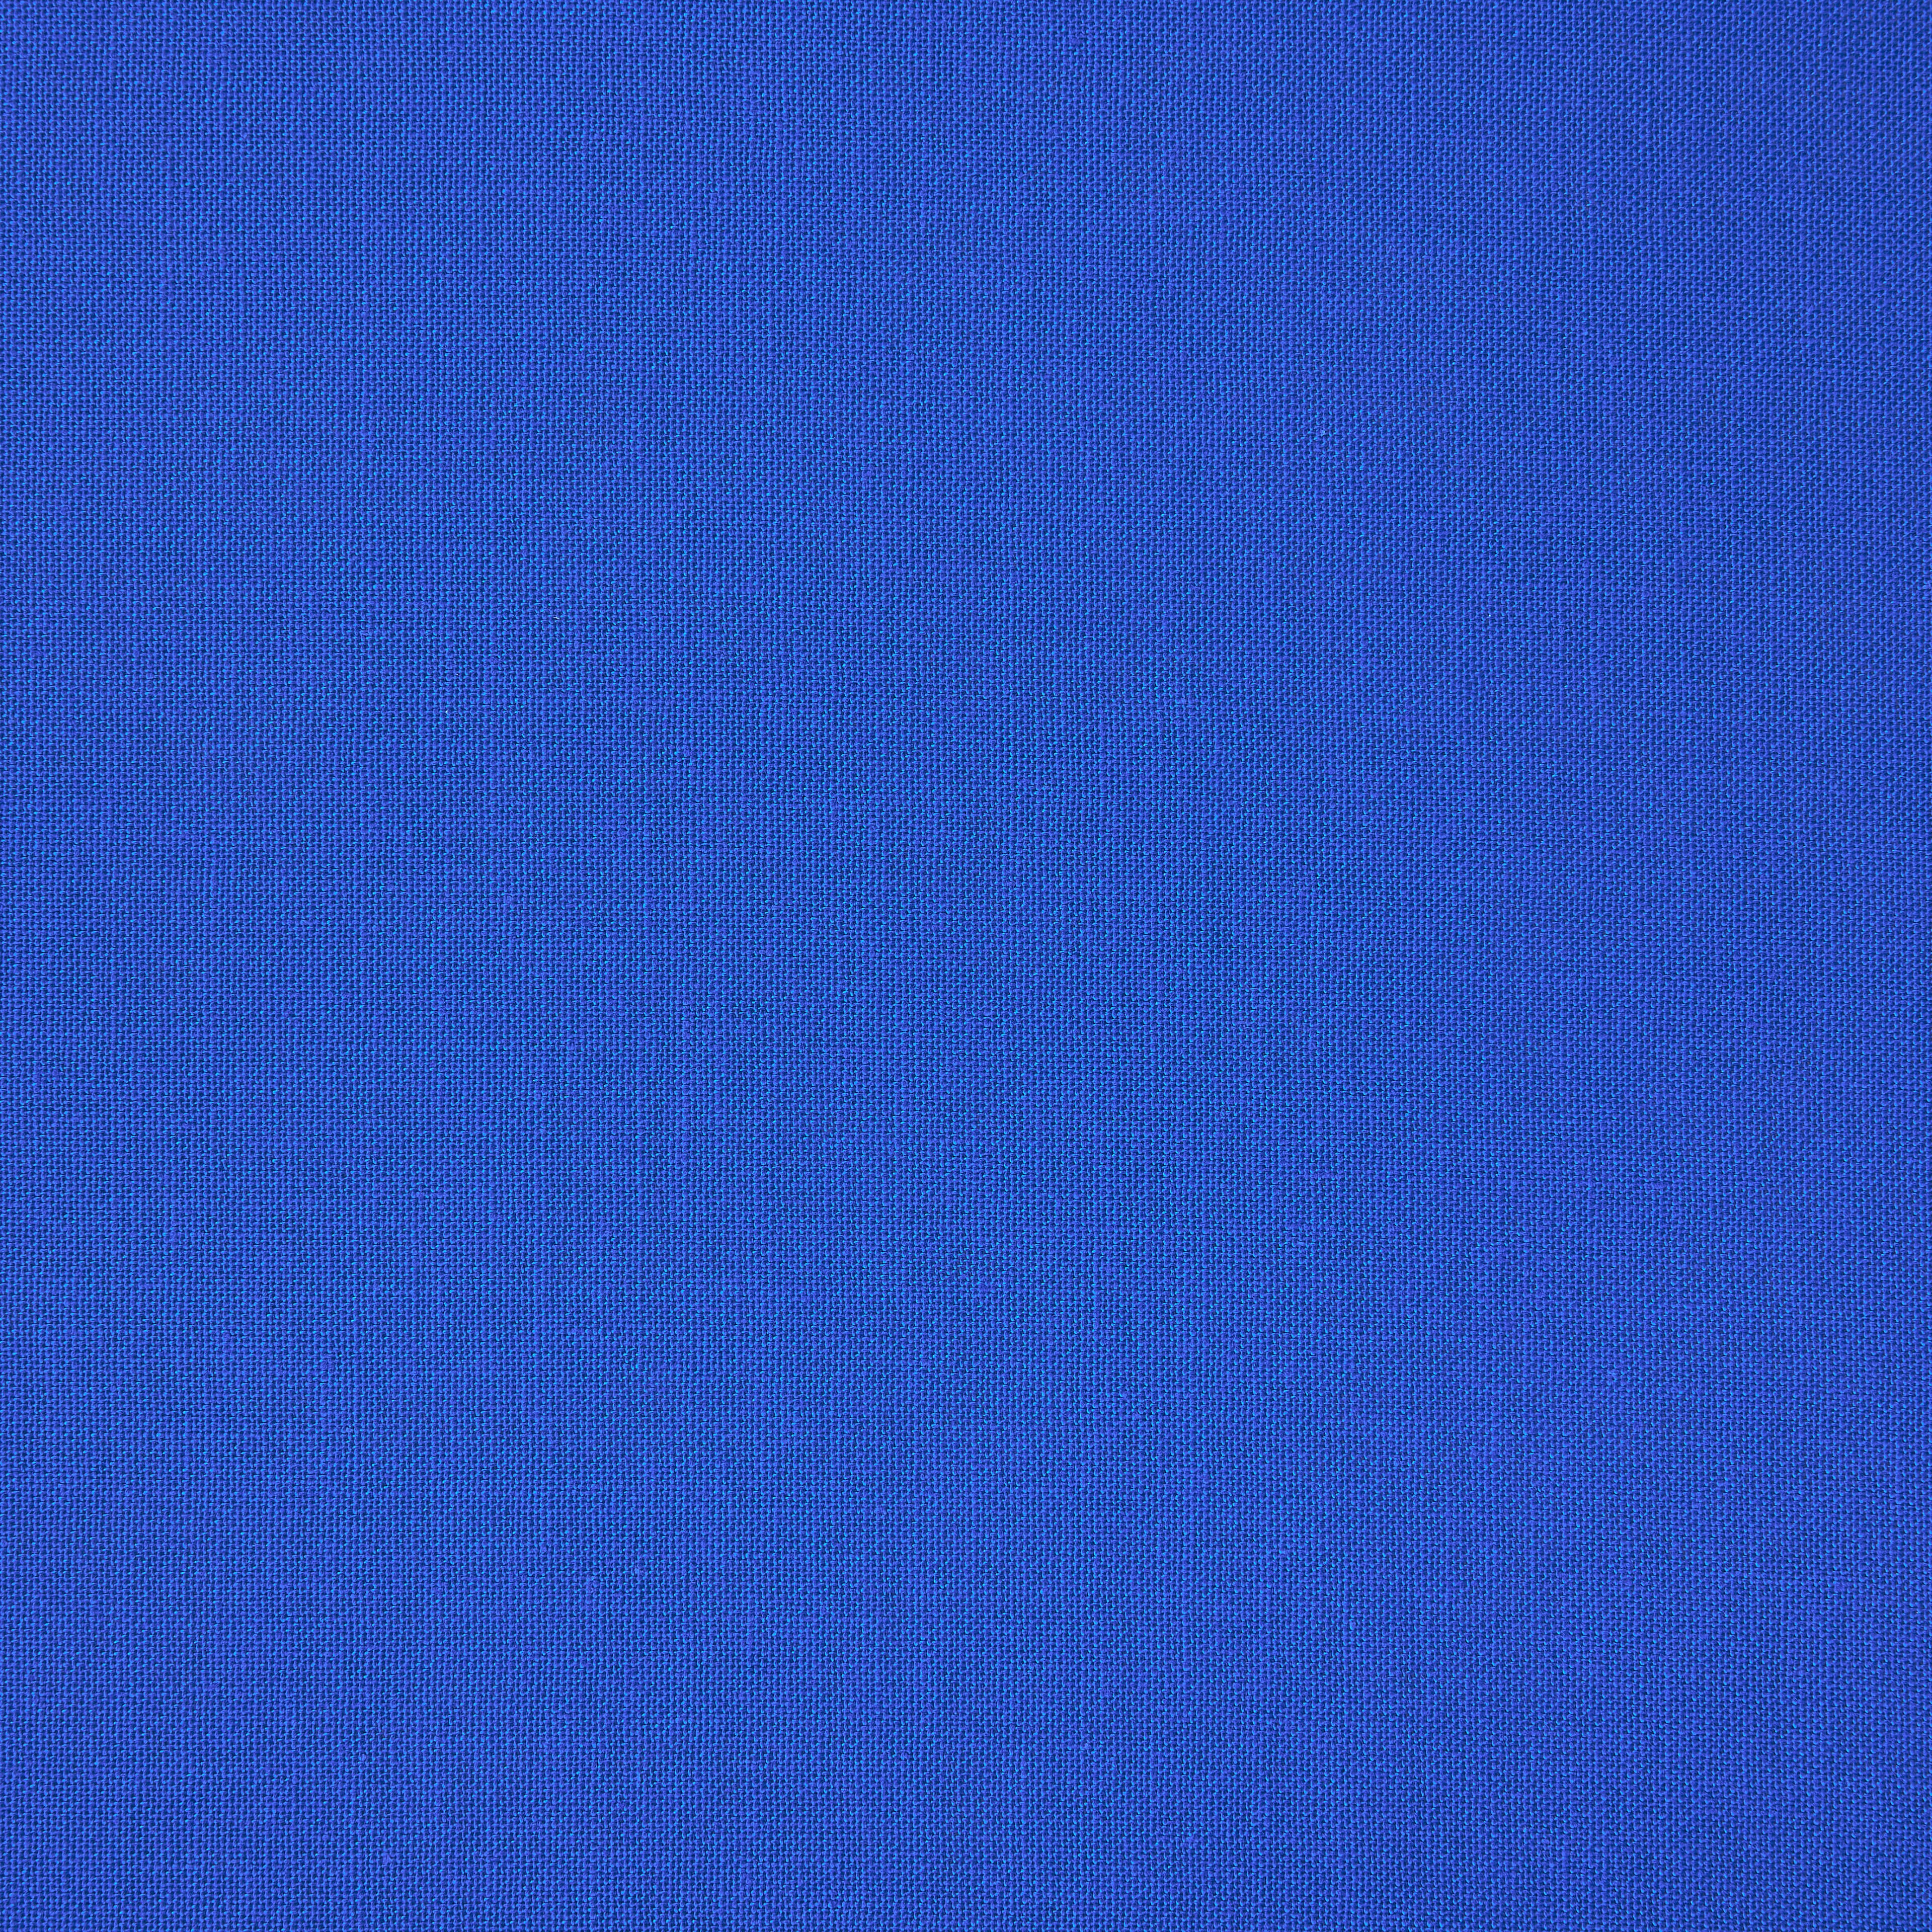 Springs Creative Royal Blue Solid Cotton Fabric